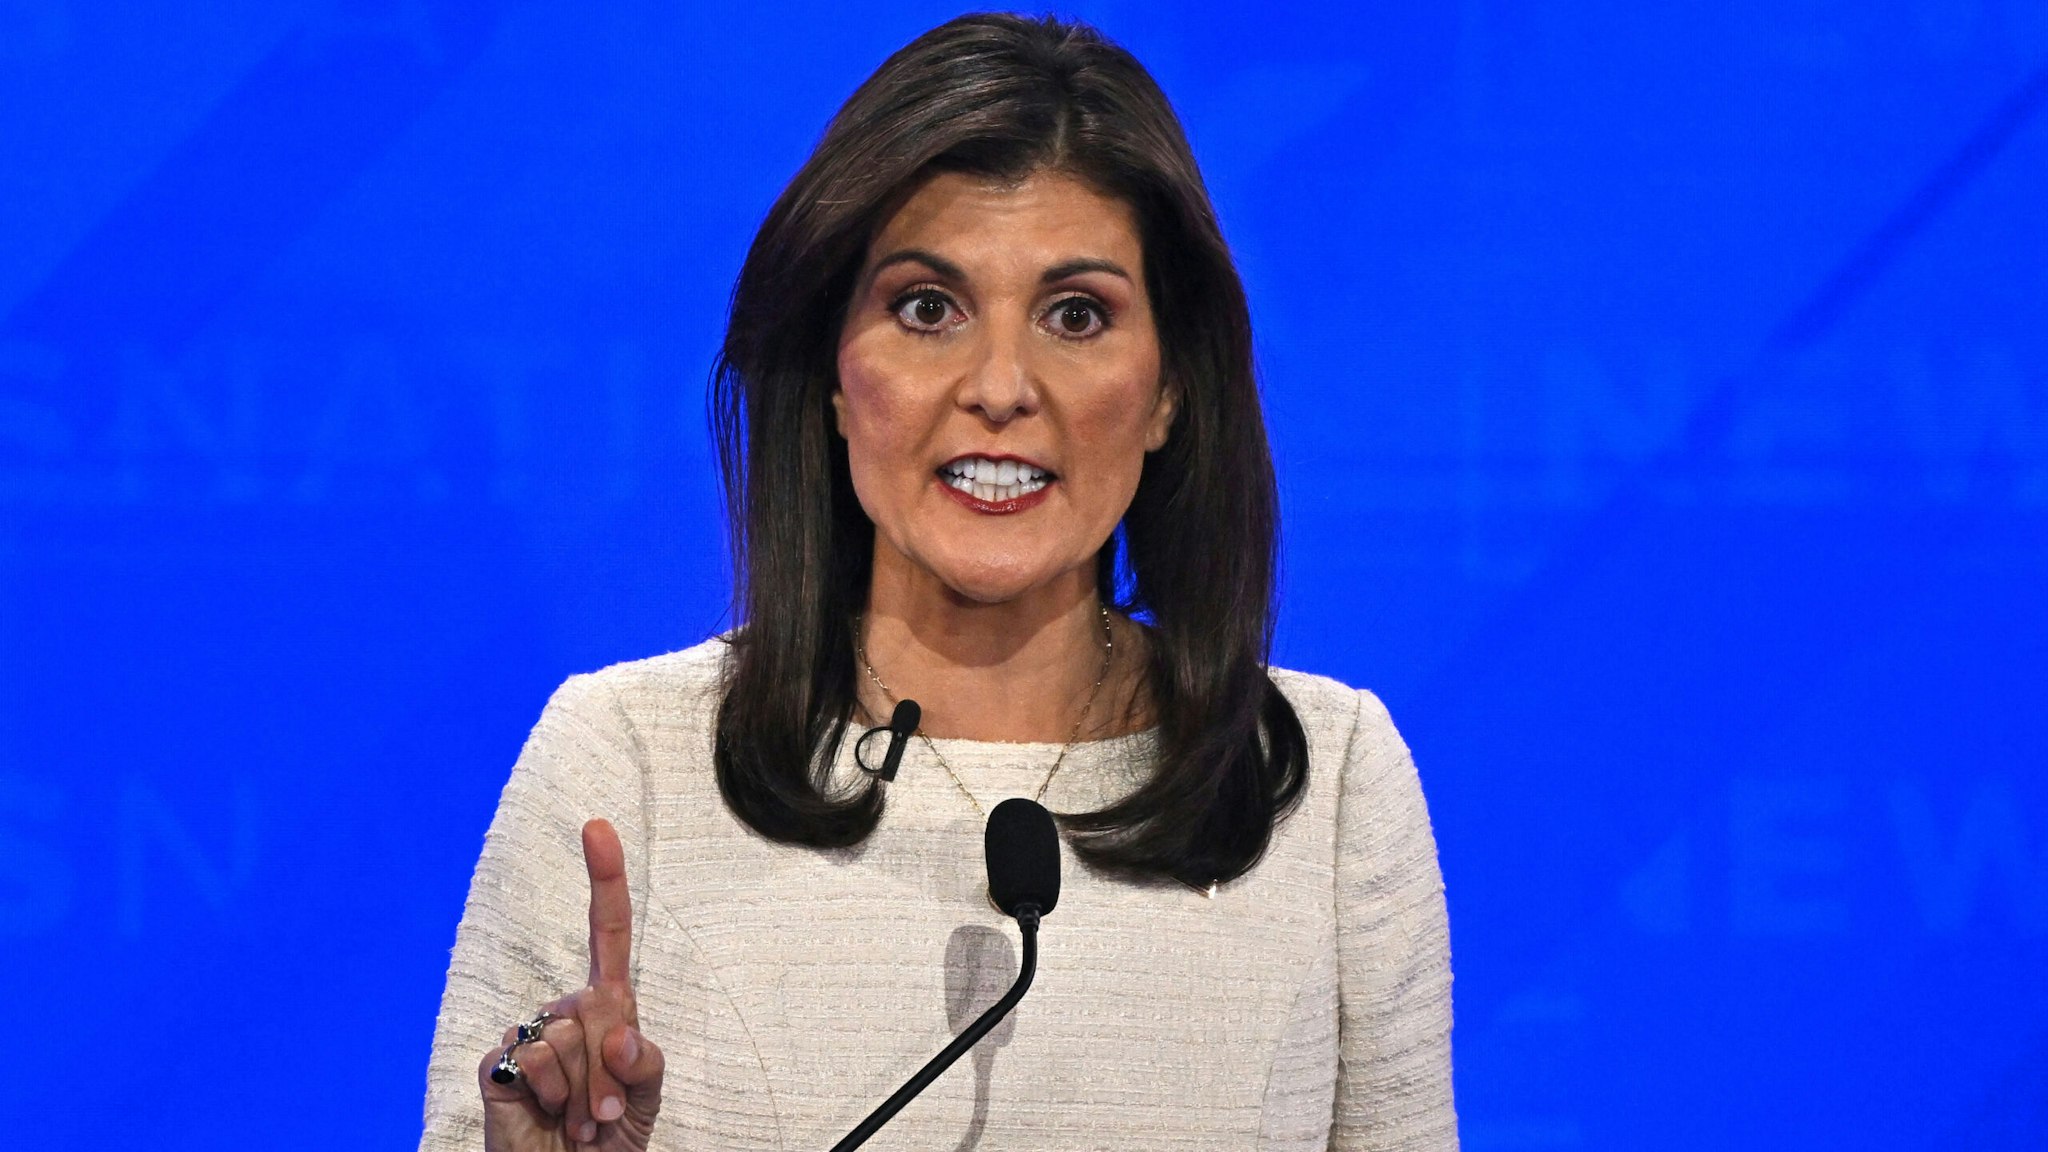 Former Governor from South Carolina and UN ambassador Nikki Haley gesturesa as she speaks during the fourth Republican presidential primary debate at the University of Alabama in Tuscaloosa, Alabama, on December 6, 2023.